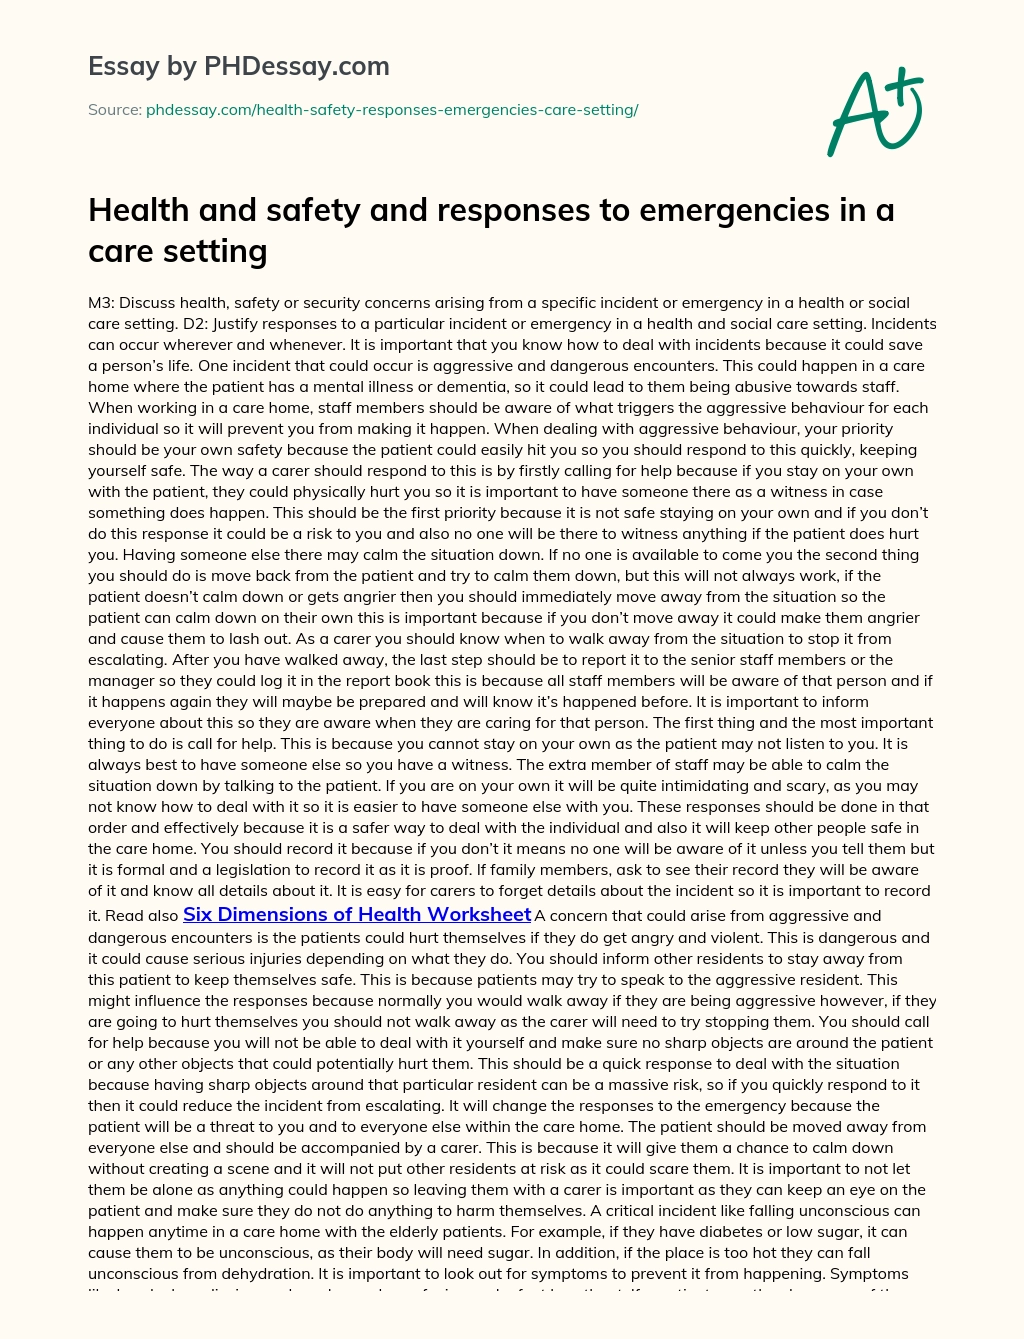 Health and safety and responses to emergencies in a care setting essay